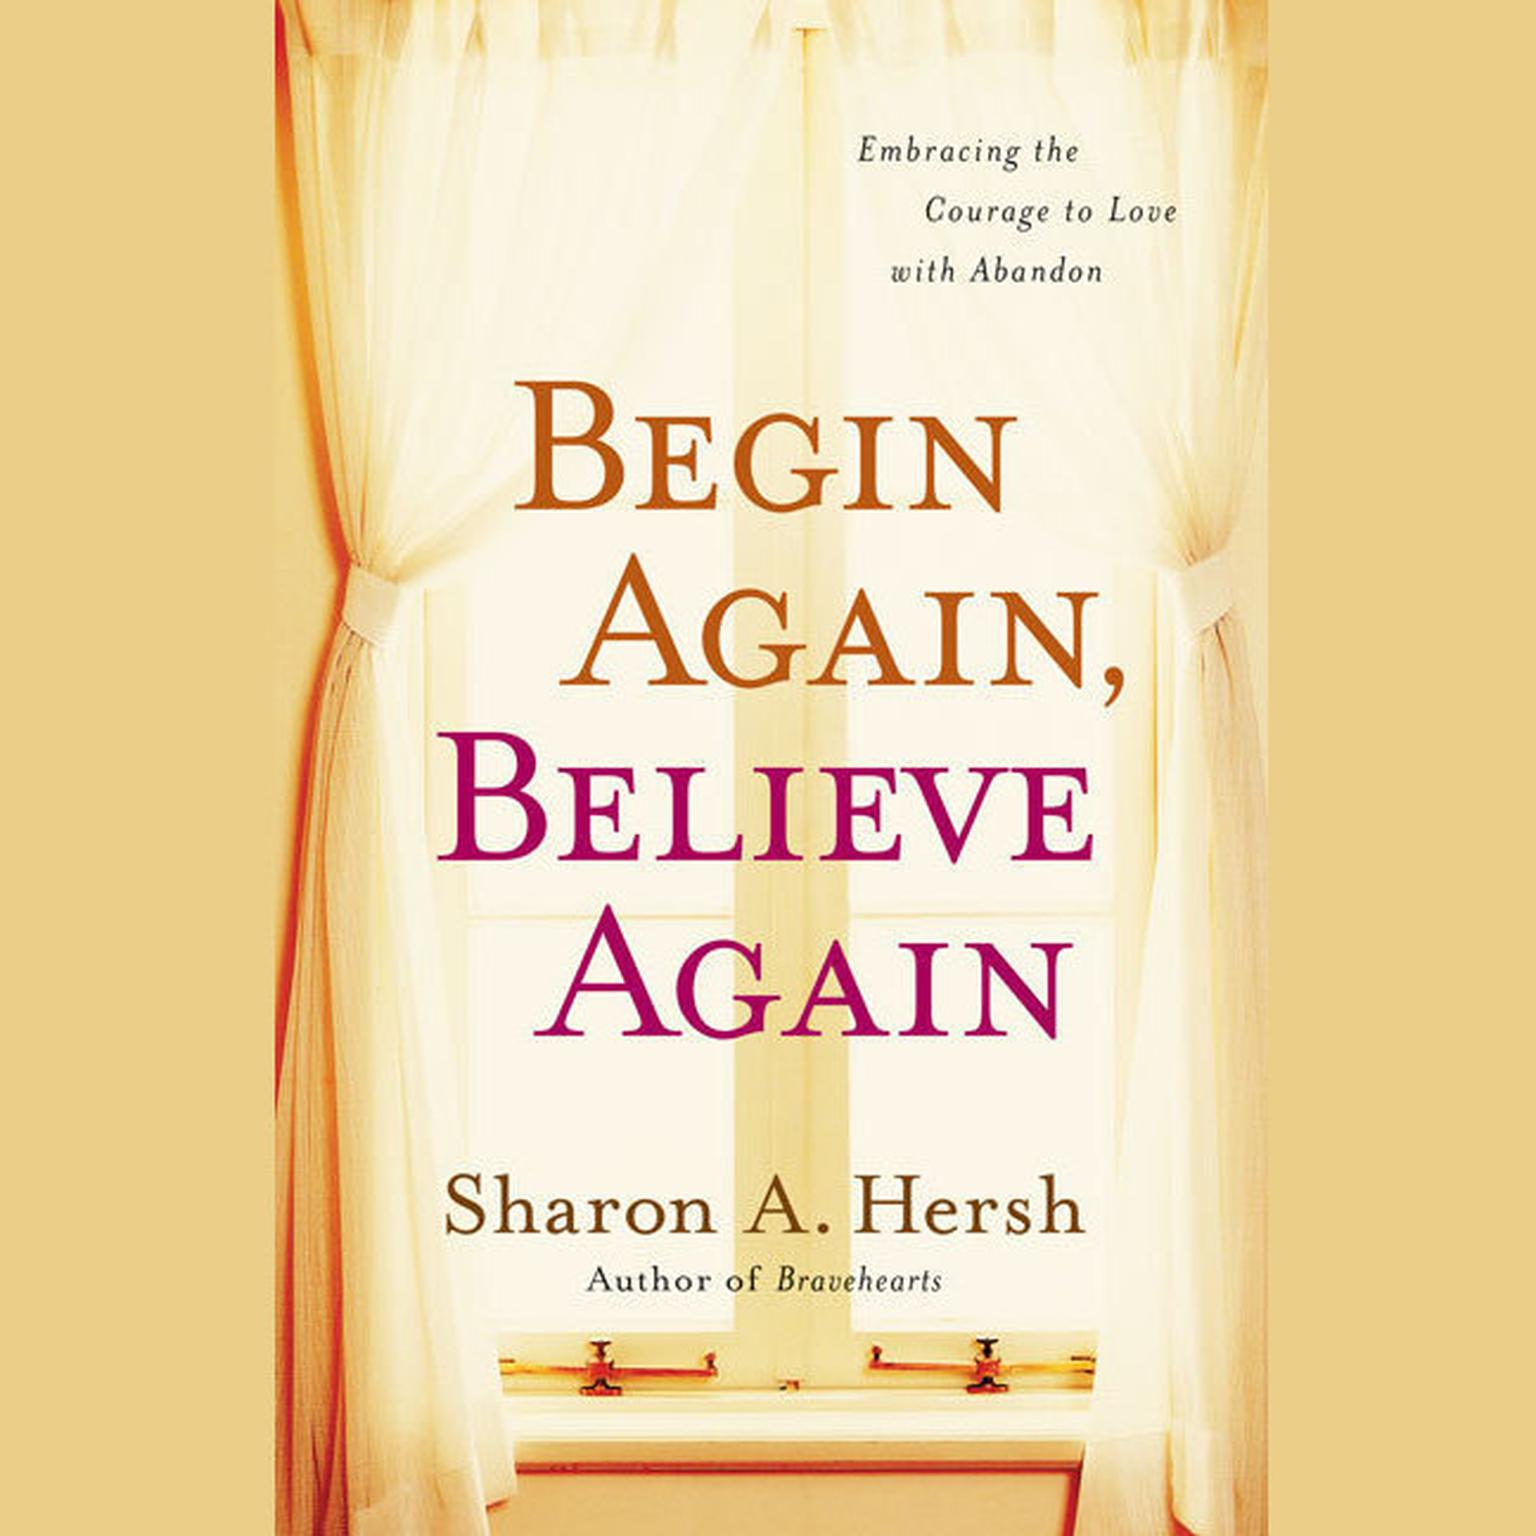 Begin Again, Believe Again: Embracing the Courage to Love with Abandon Audiobook, by Sharon A. Hersh